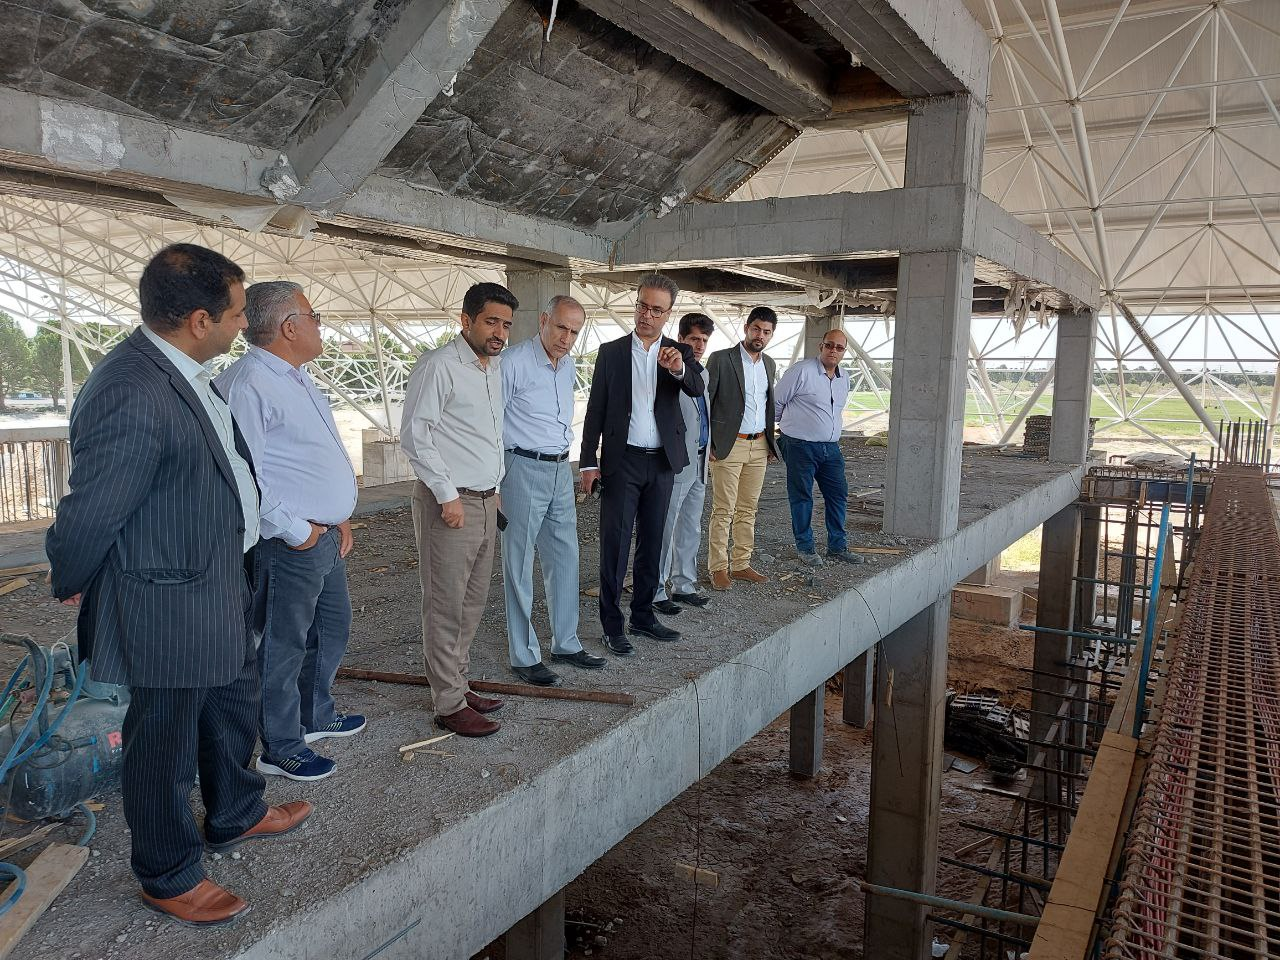 The CEO of the Civil Organization visited the progress of construction projects